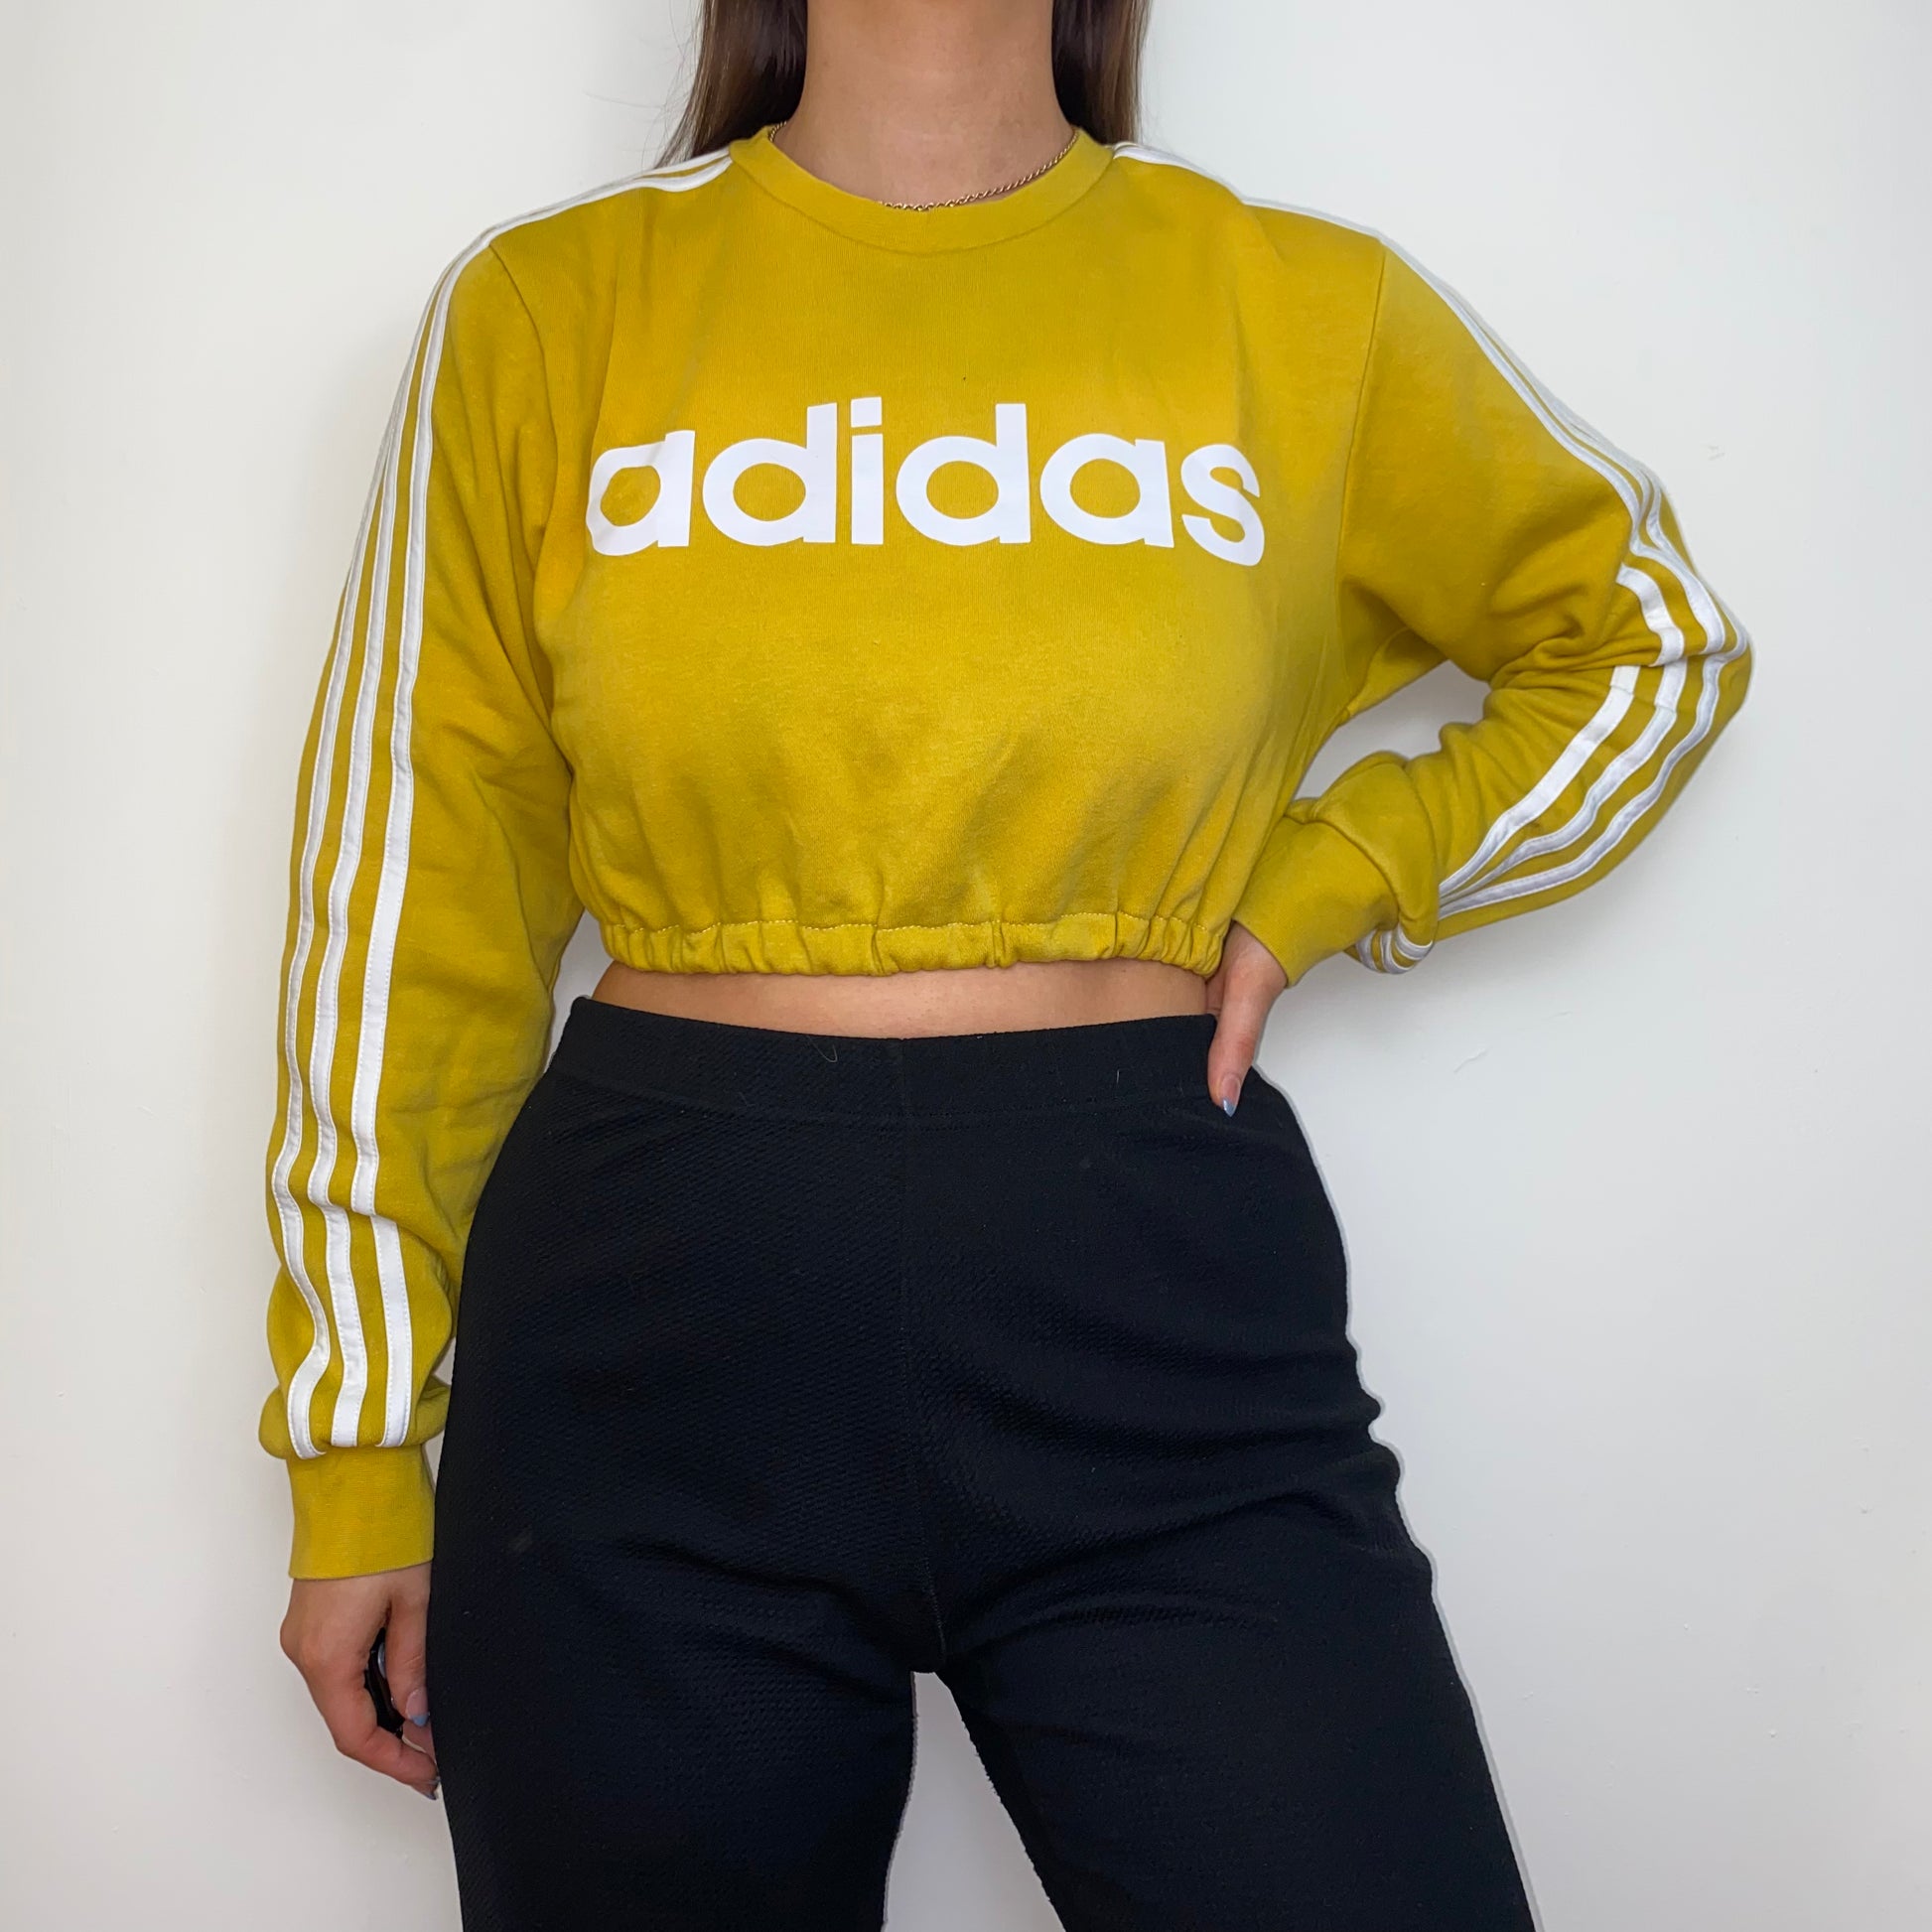 yellow cropped sweatshirt with white adidas logo shown on a model wearing black trousers